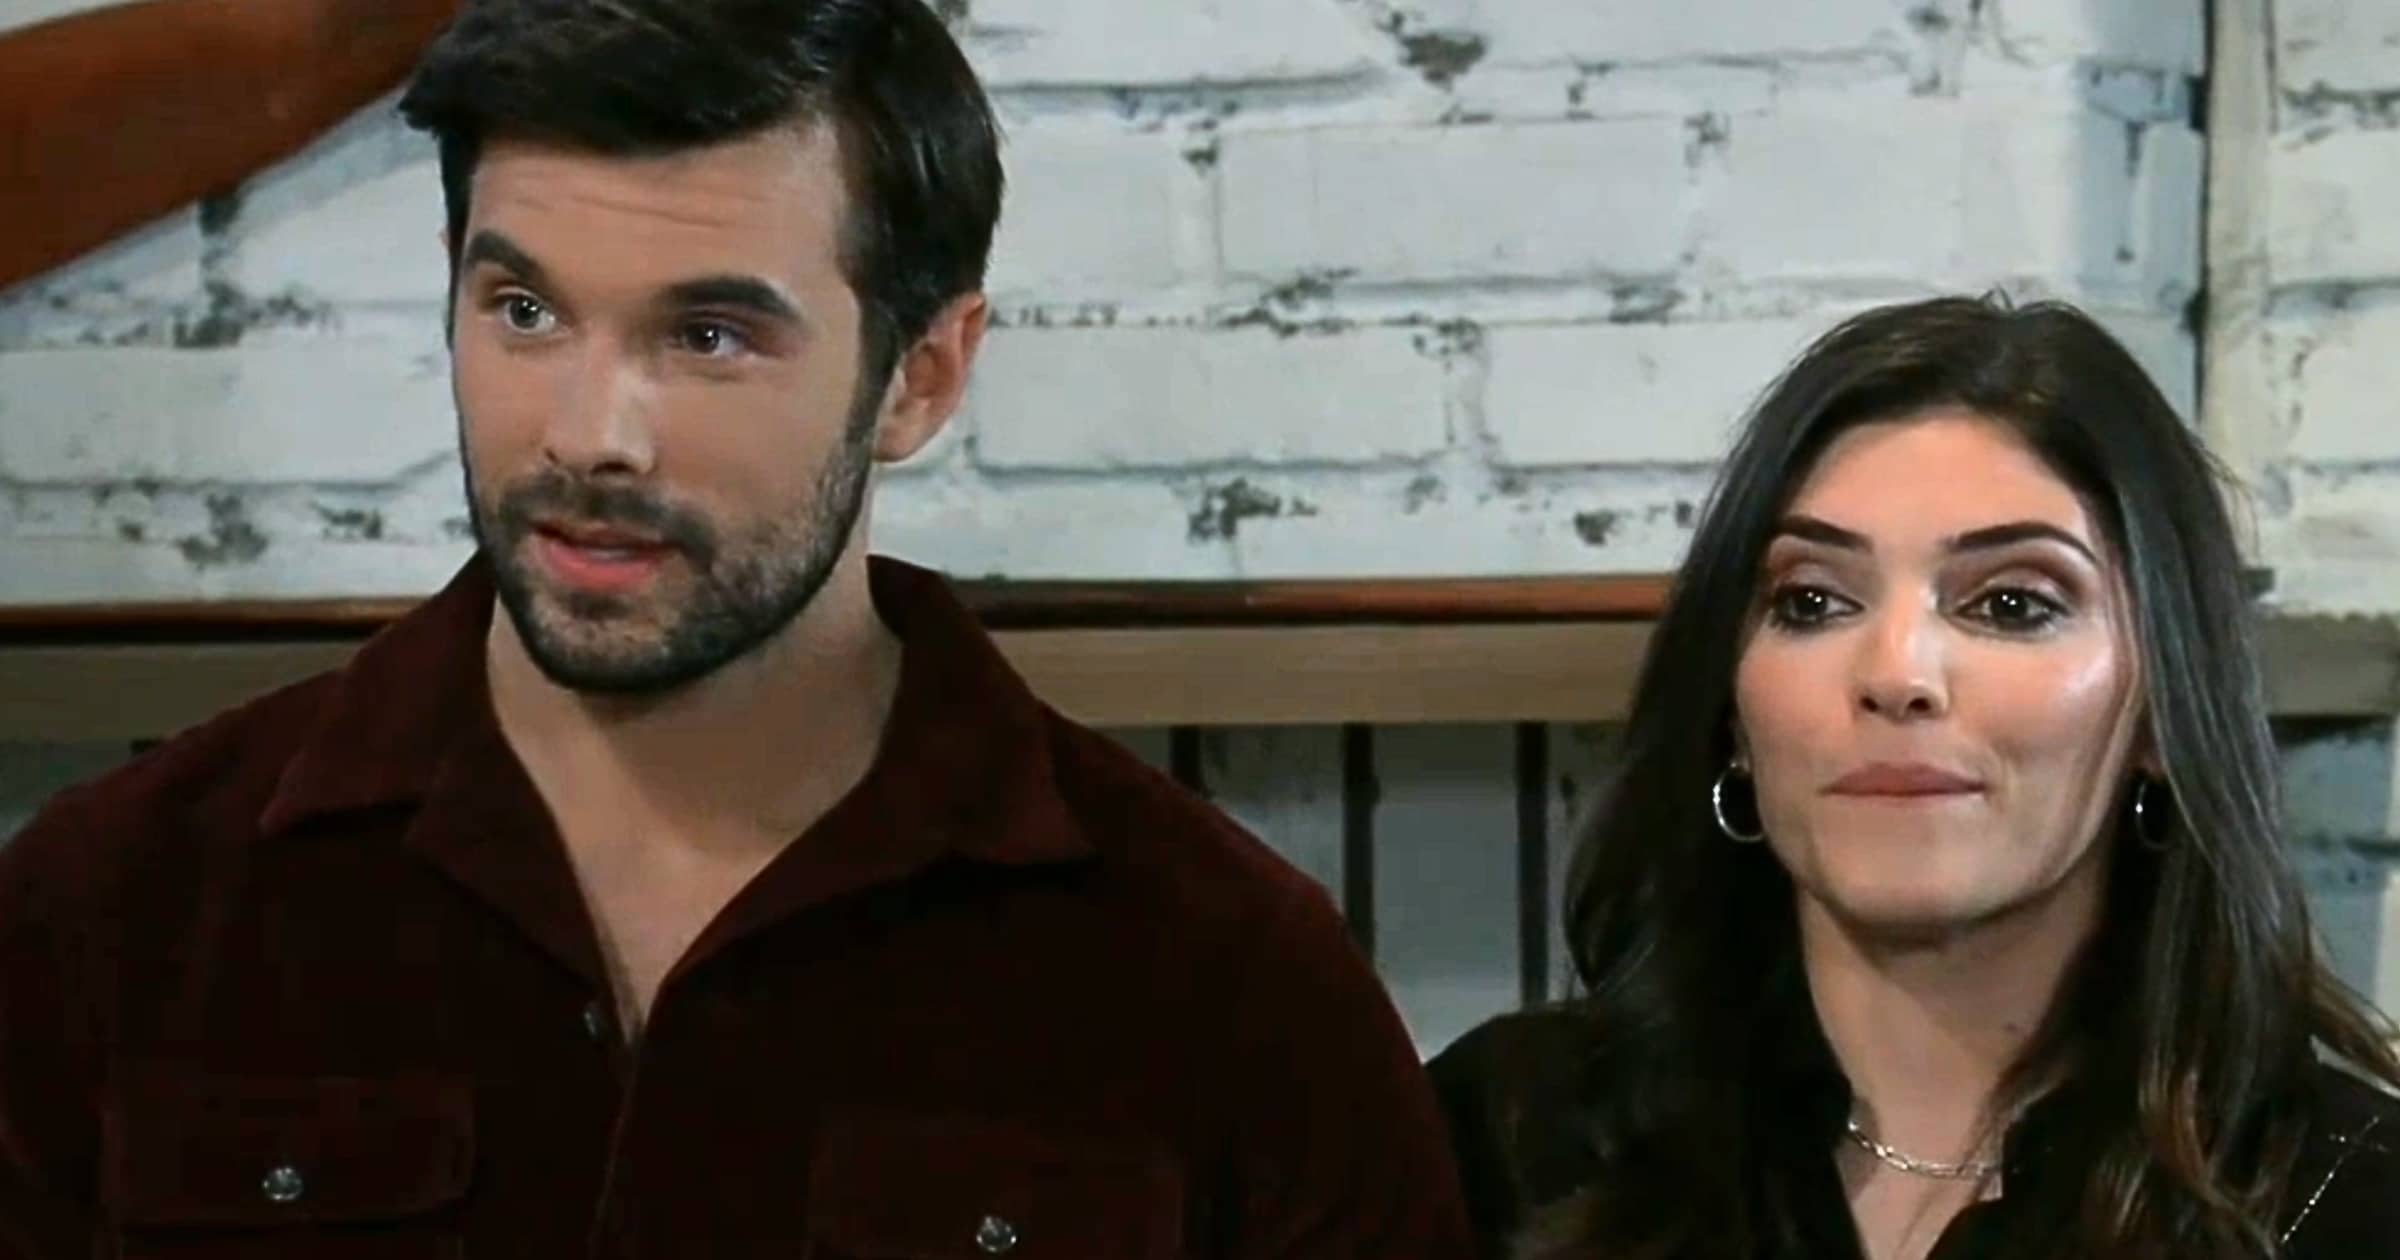 General Hospital - Dec 11 - Chase and Brook Lynn